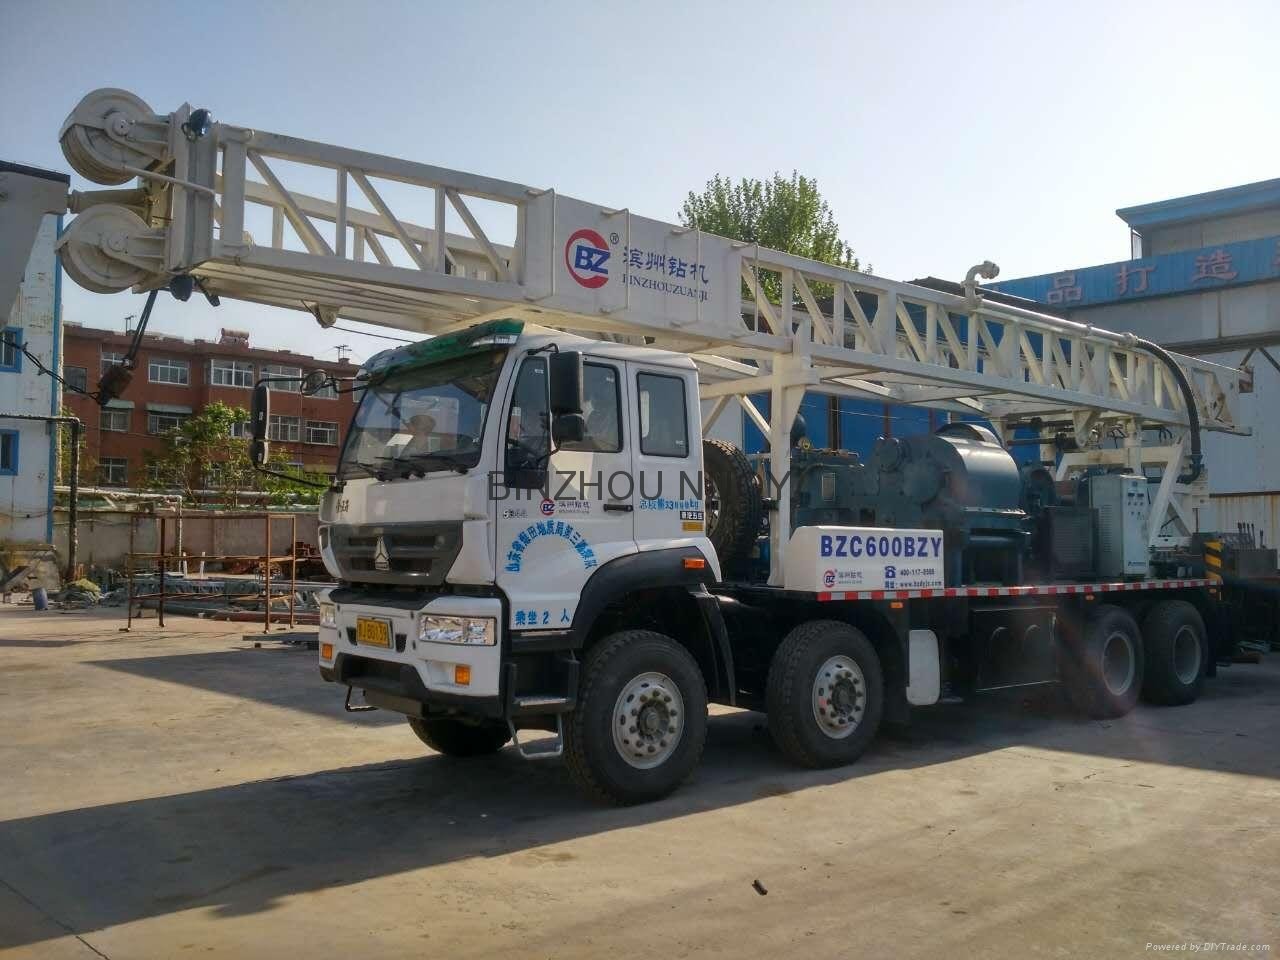 NYC-600BZY truck mounted drilling rig